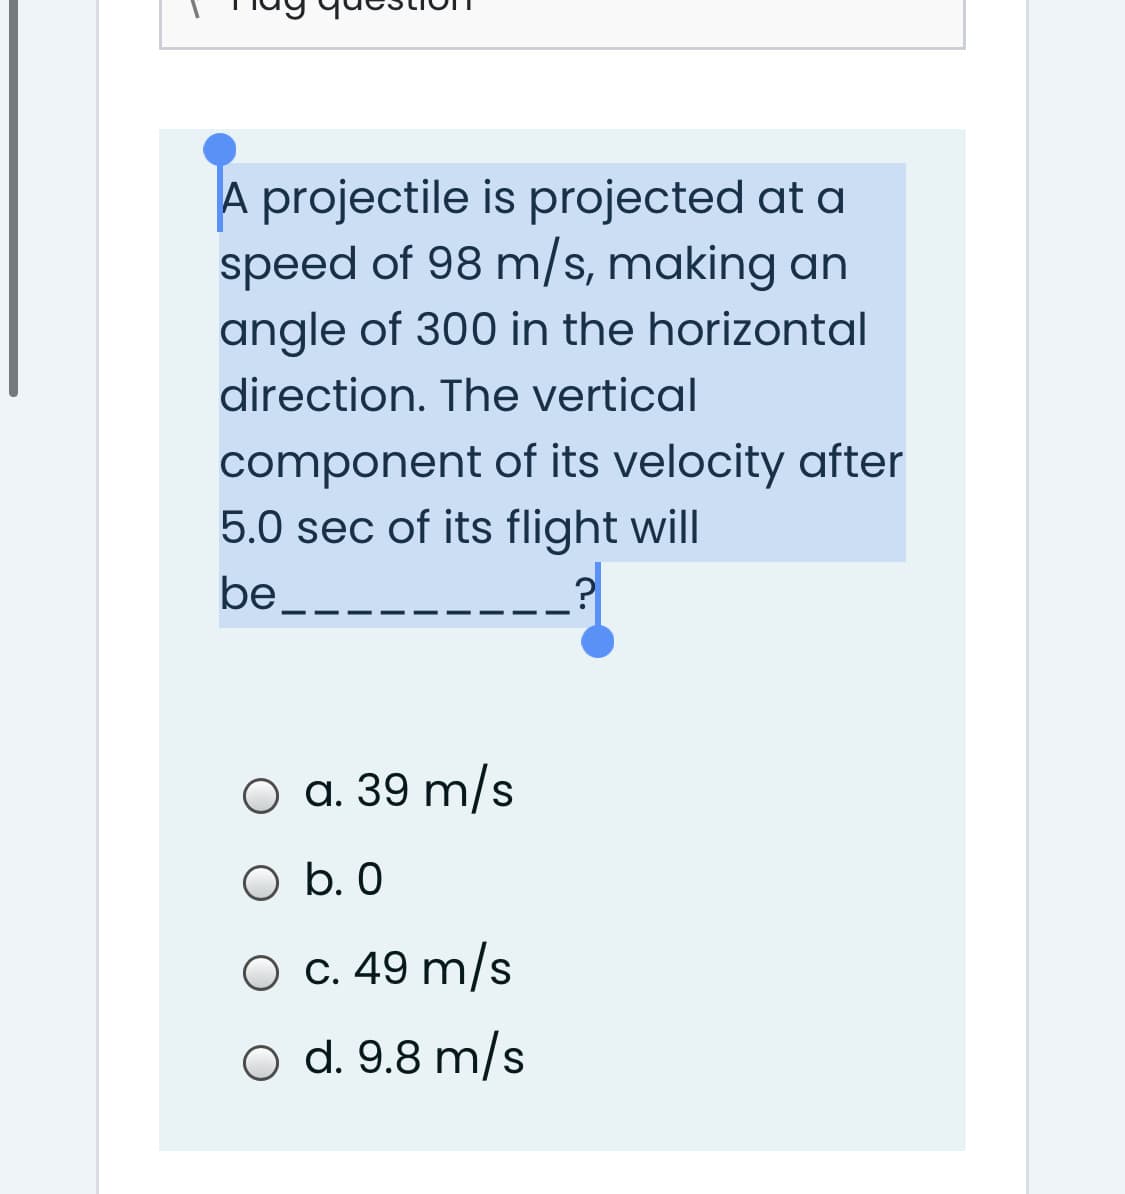 A projectile is projected at a
speed of 98 m/s, making an
angle of 300 in the horizontal
direction. The vertical
component of its velocity after
5.0 sec of its flight will
be.
O a. 39 m/s
O b. 0
O c. 49 m/s
o d. 9.8 m/s
